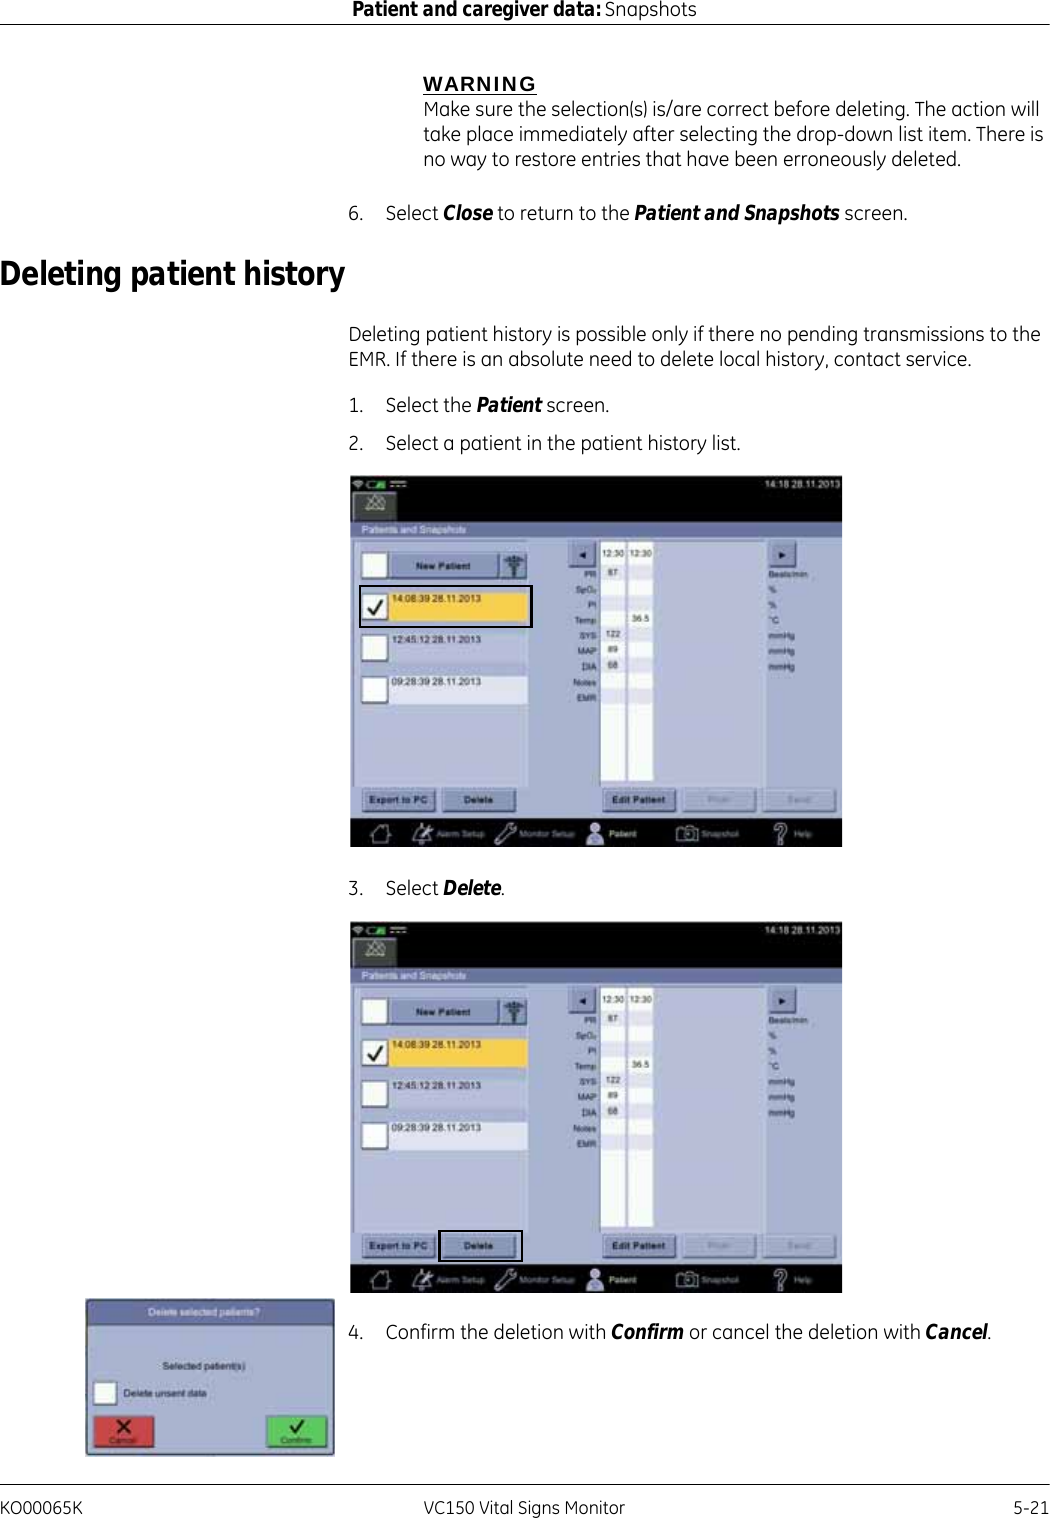 KO00065K VC150 Vital Signs Monitor 5-21Patient and caregiver data: SnapshotsWARNINGMake sure the selection(s) is/are correct before deleting. The action will take place immediately after selecting the drop-down list item. There is no way to restore entries that have been erroneously deleted.6. Select Close to return to the Patient and Snapshots screen.Deleting patient historyDeleting patient history is possible only if there no pending transmissions to the EMR. If there is an absolute need to delete local history, contact service.1. Select the Patient screen.2. Select a patient in the patient history list.3. Select Delete.4. Confirm the deletion with Confirm or cancel the deletion with Cancel.